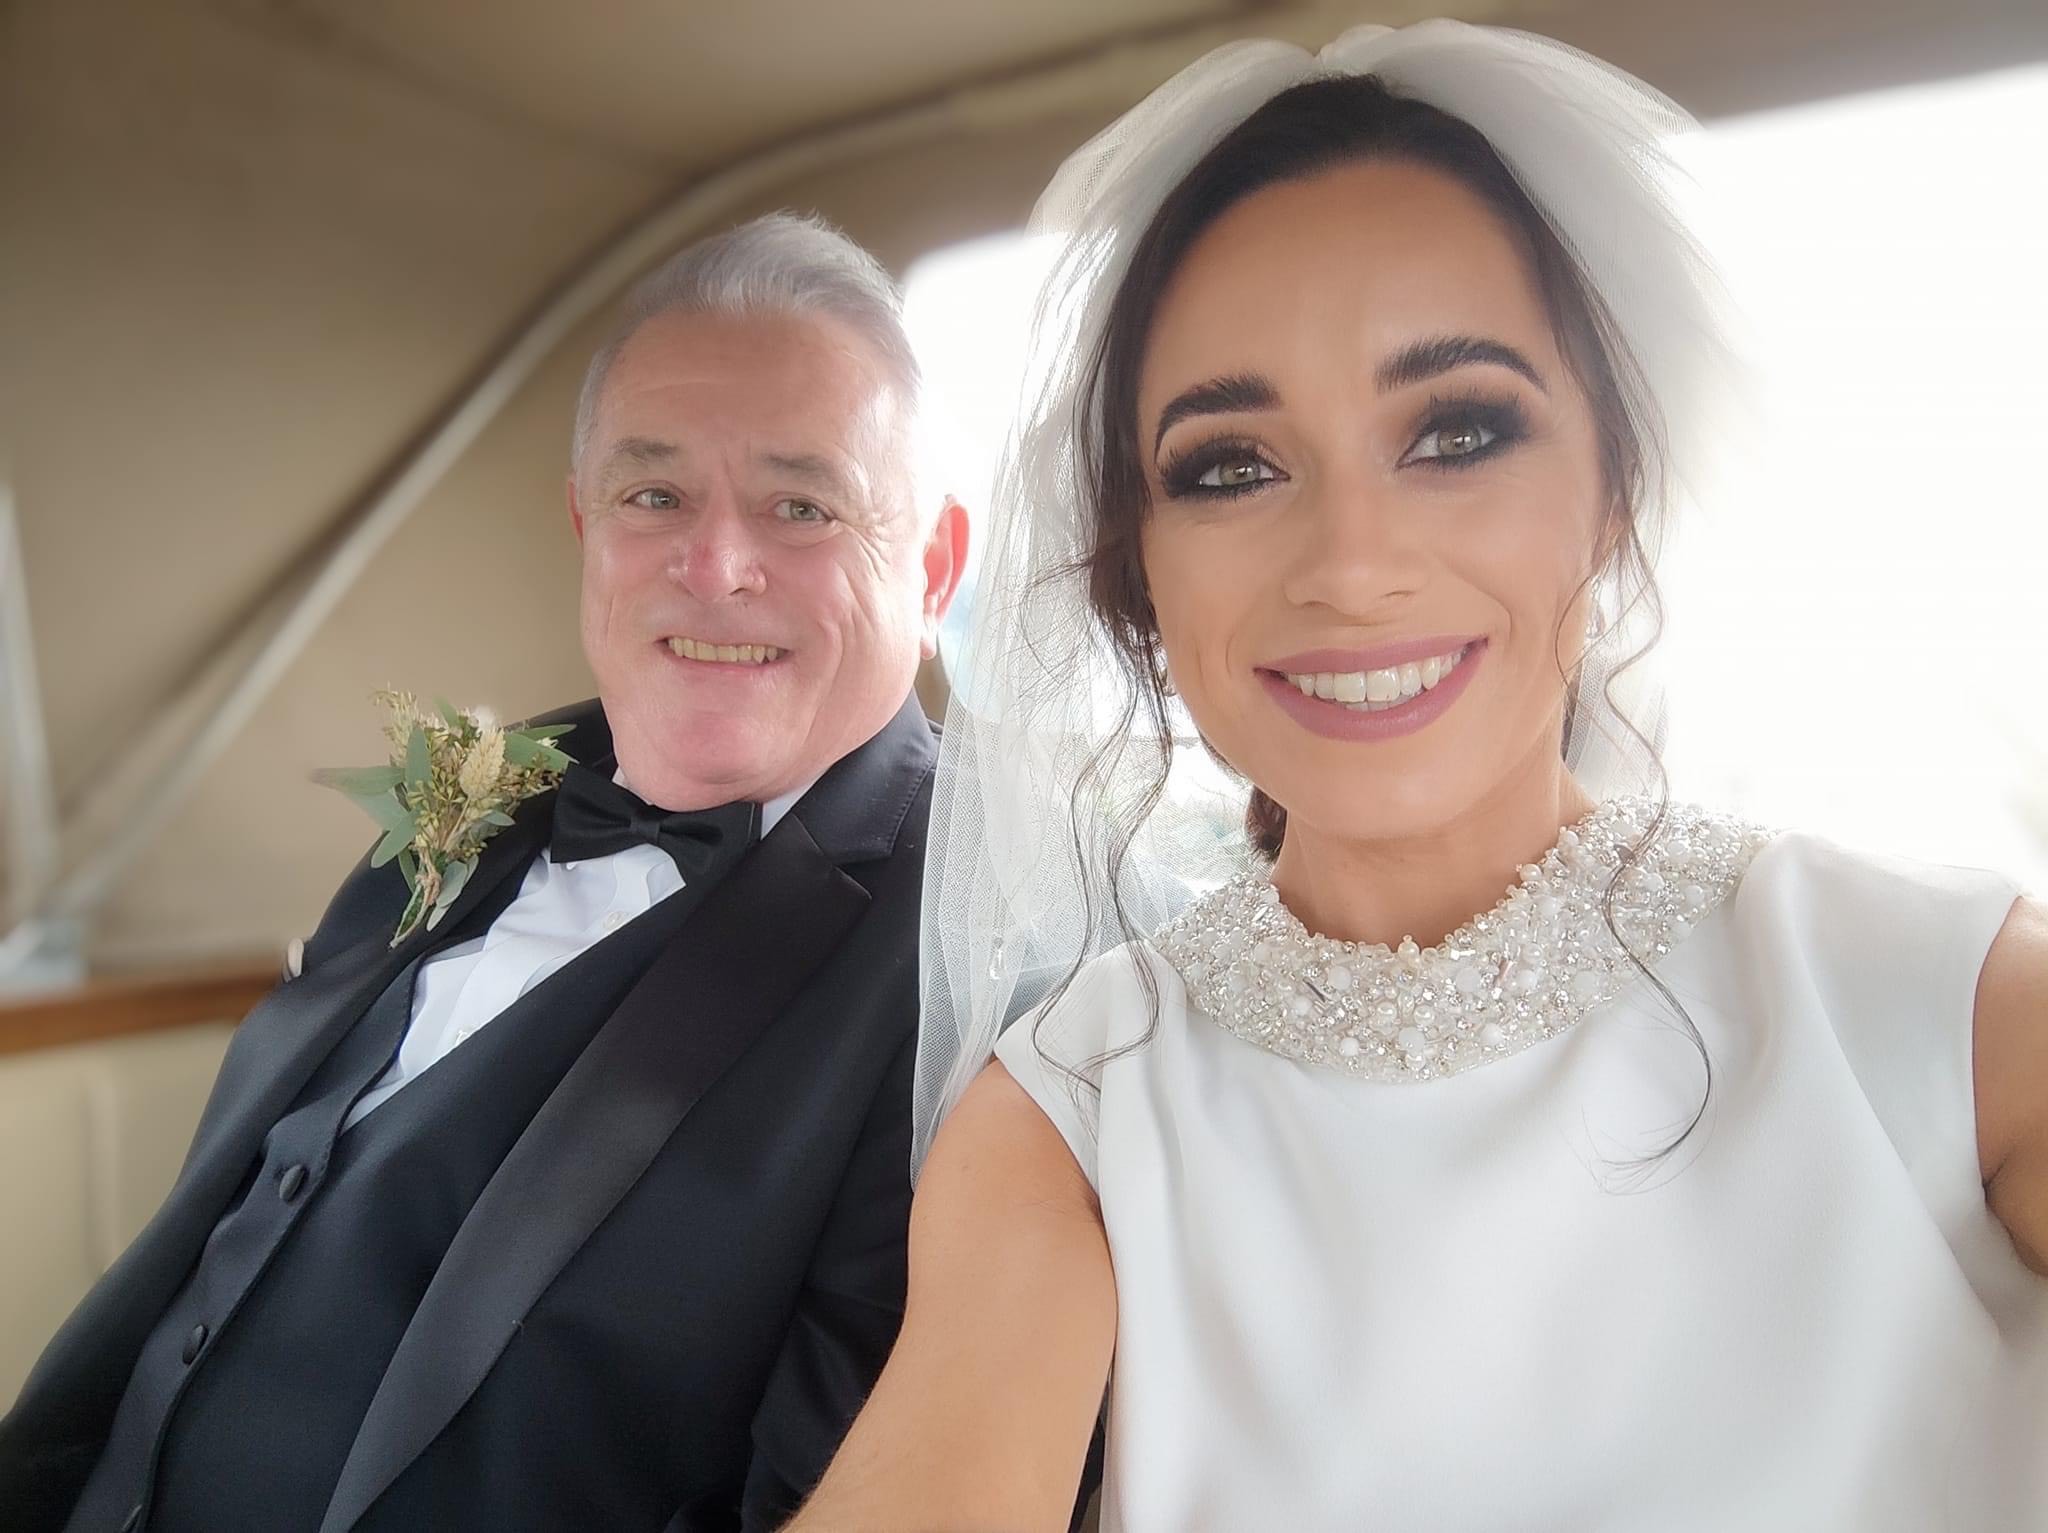 Strabane woman raises £3k for cancer charity to thank them for helping her dad